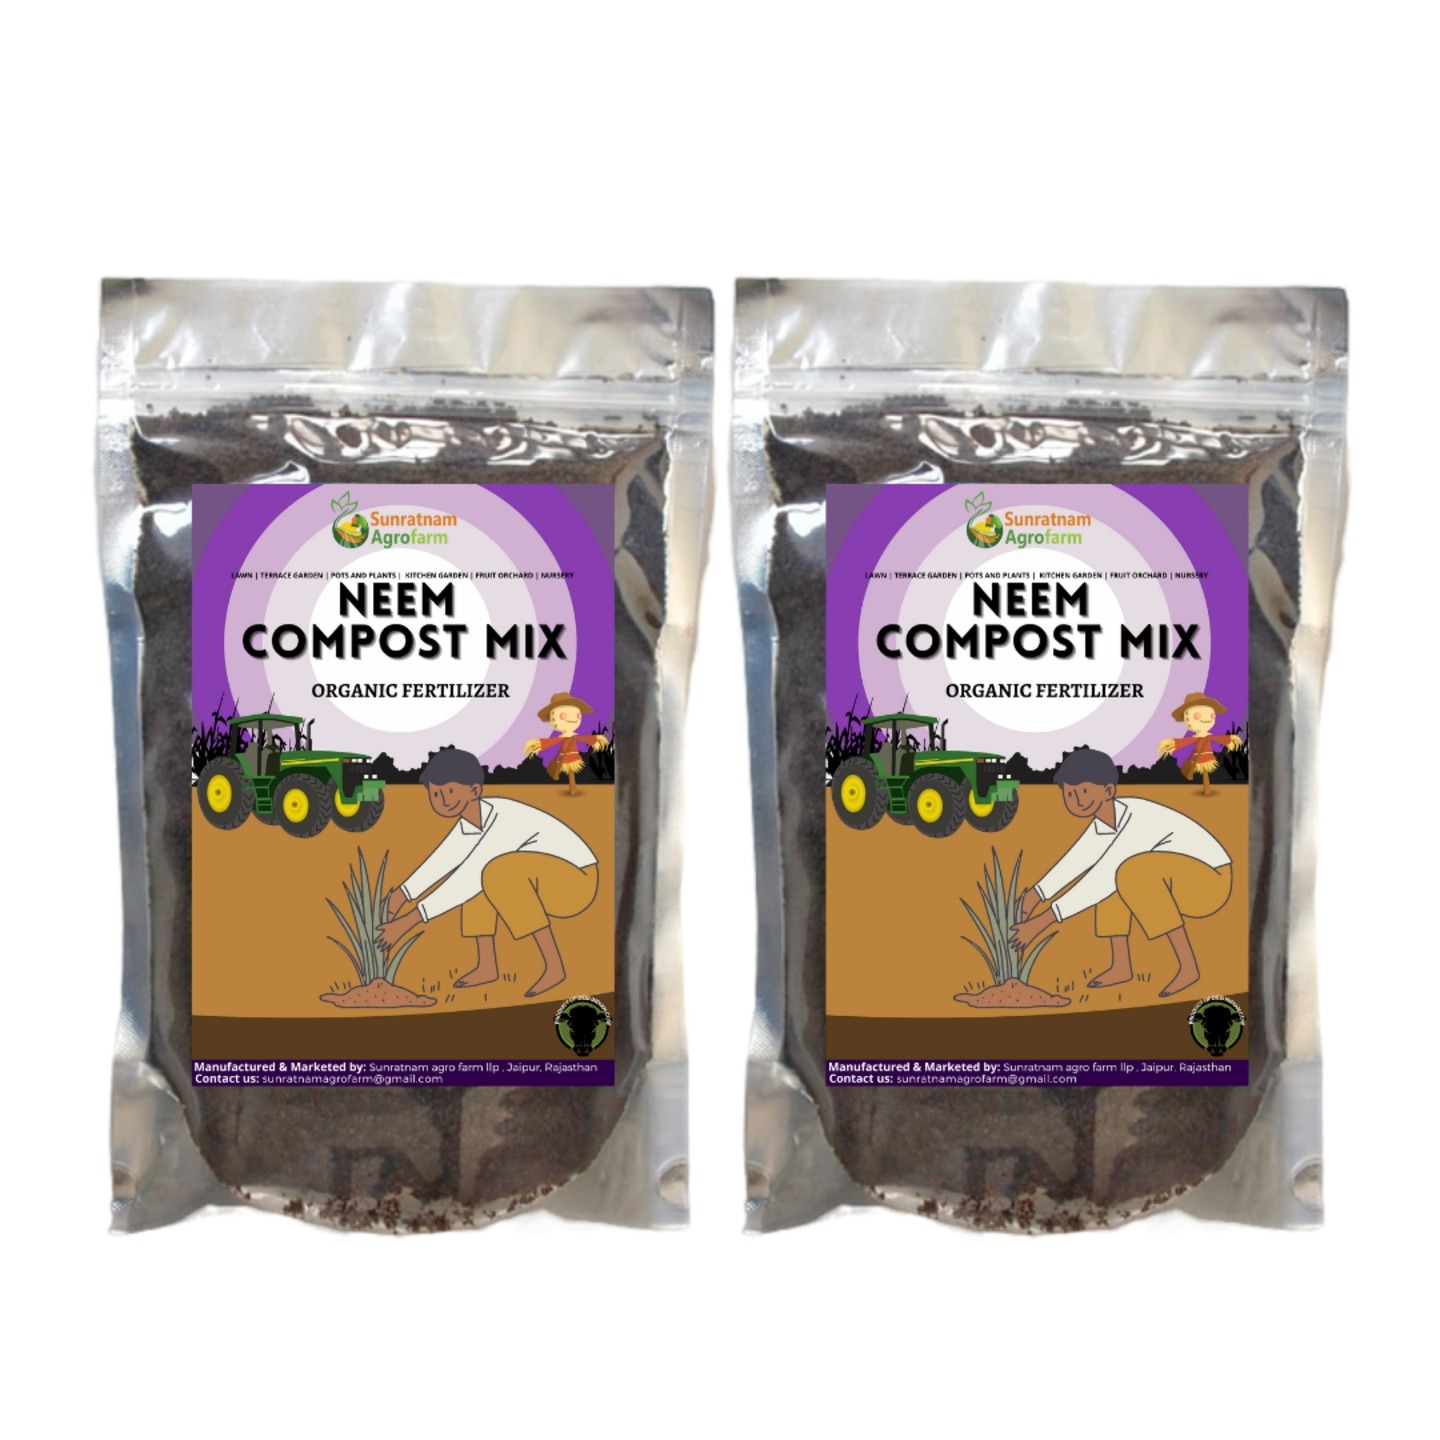 Pack of 2 Sunratnam Neem Compost MIx 900gms pack of 2